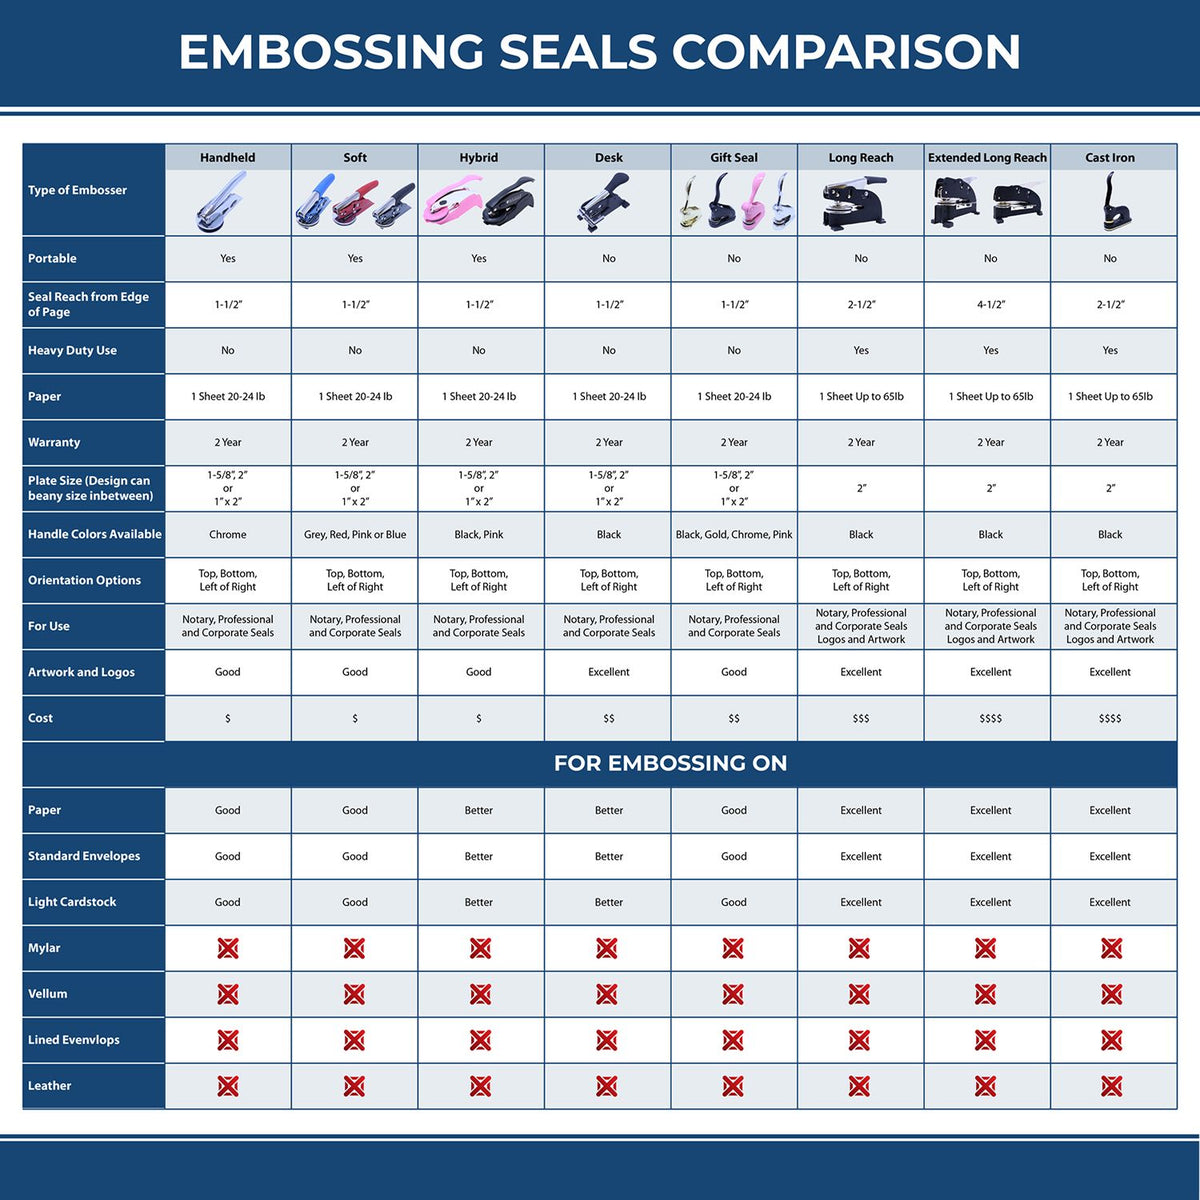 A comparison chart for the different types of mount models available for the Heavy Duty Cast Iron Nebraska Engineer Seal Embosser.